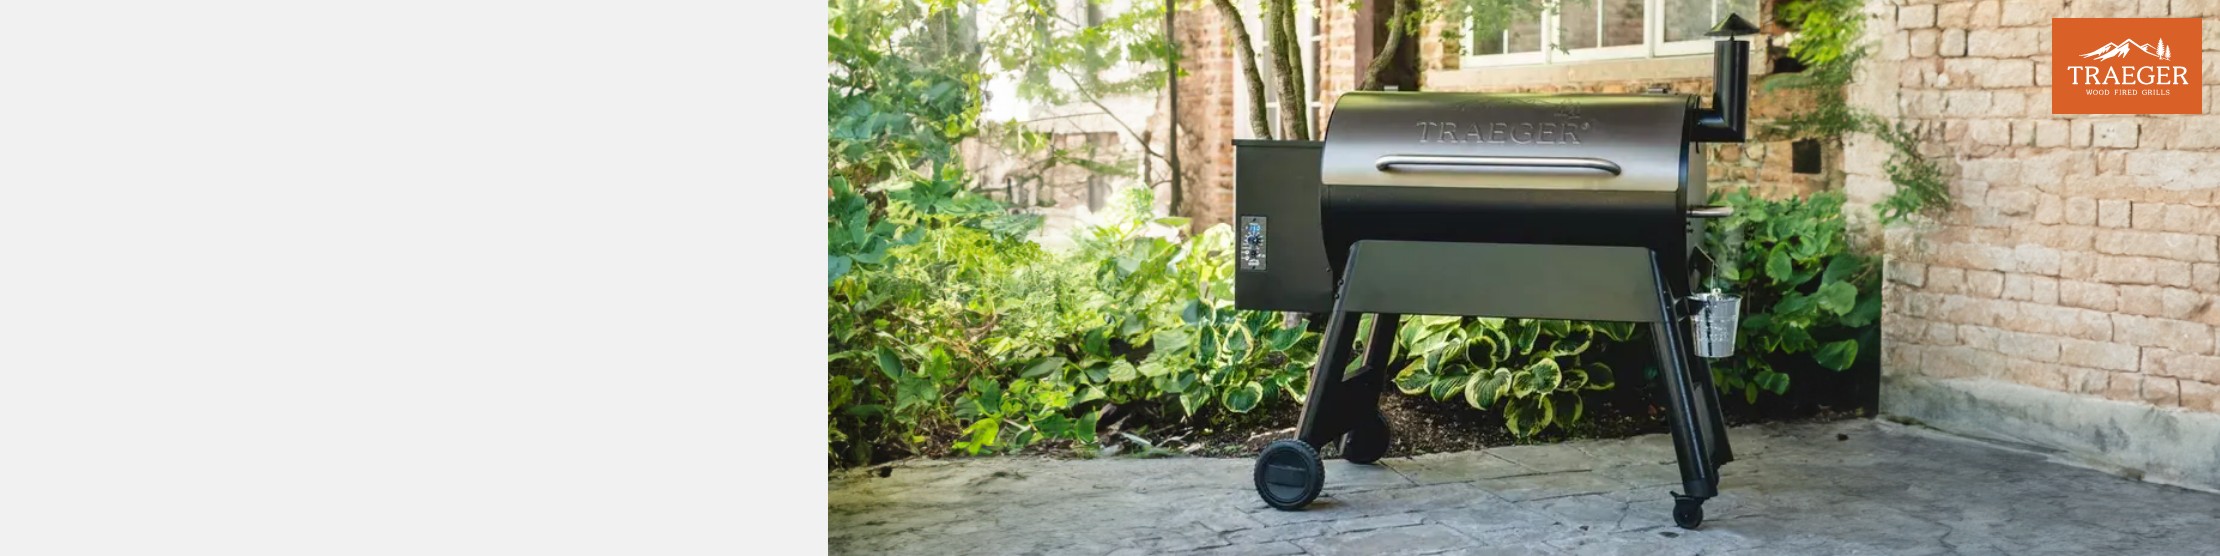 Free Delivery & Assembly**  on Traeger Wood Pellet Grills     **Local delivery area only.    SHOP NOW